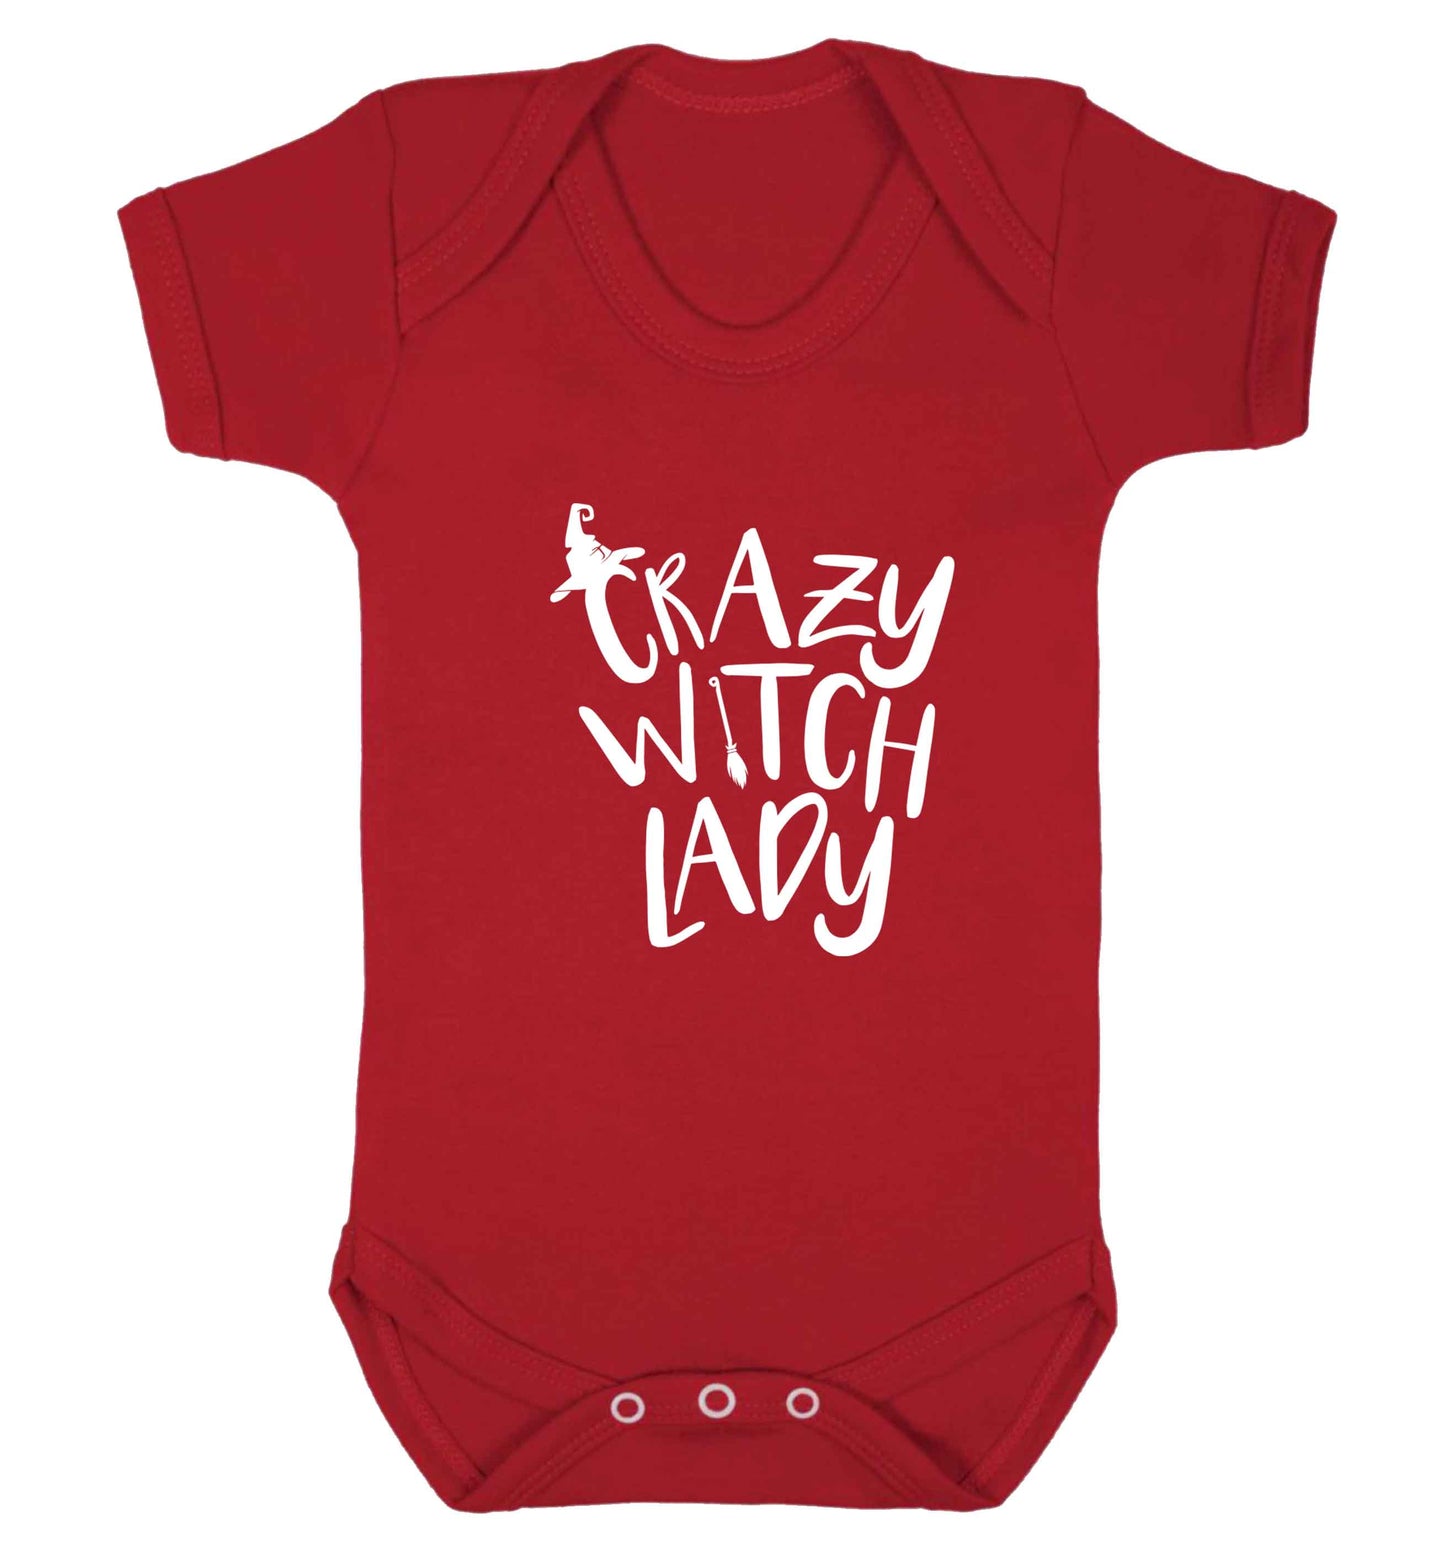 Crazy witch lady baby vest red 18-24 months